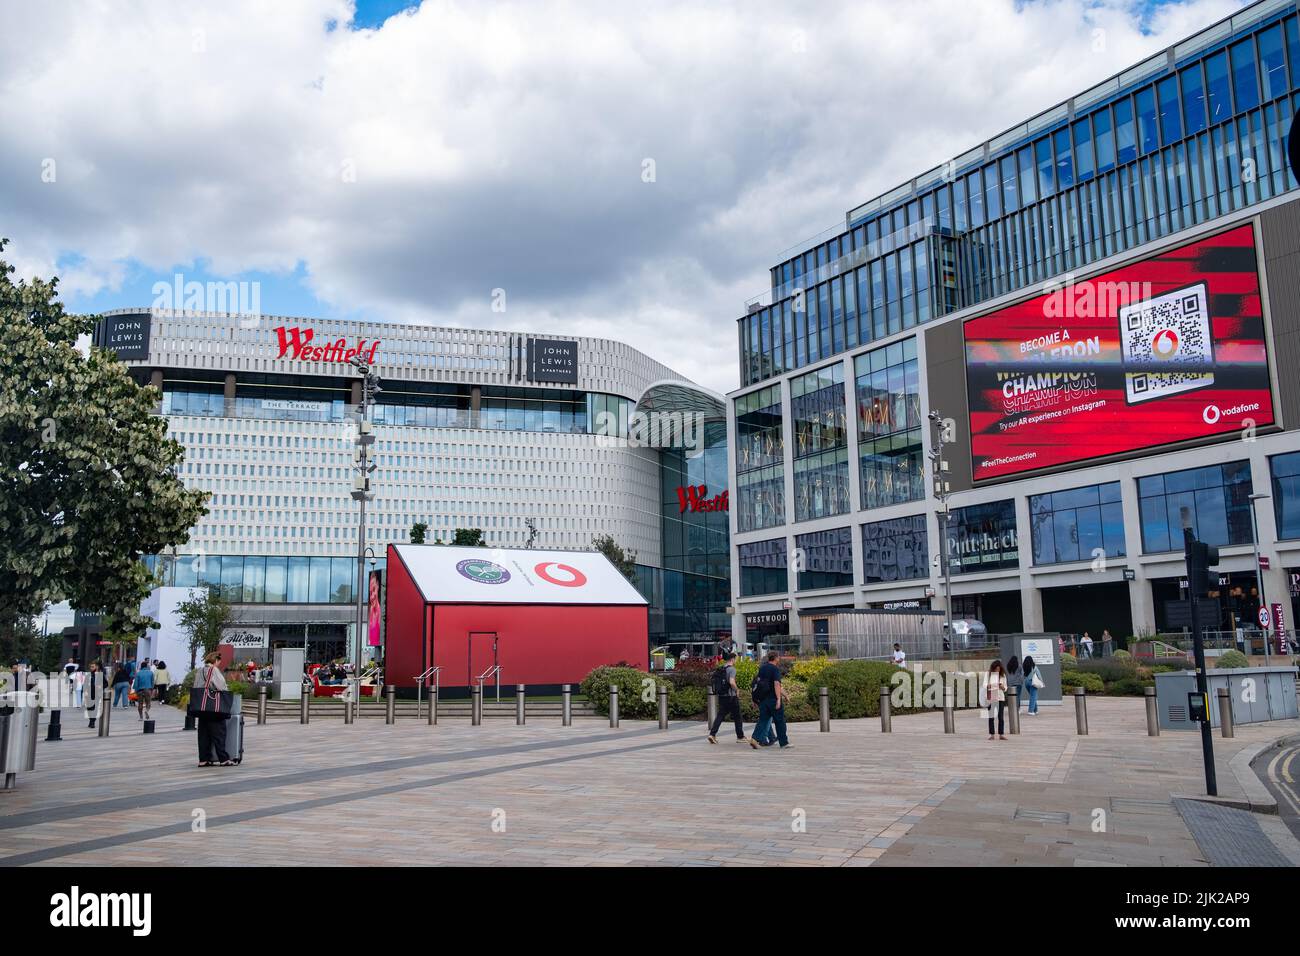 London, July 2022: Westfield Shopping Centre in Shepherds Bush. Large-scale indoor retail centre with many high street and luxury chains. Stock Photo